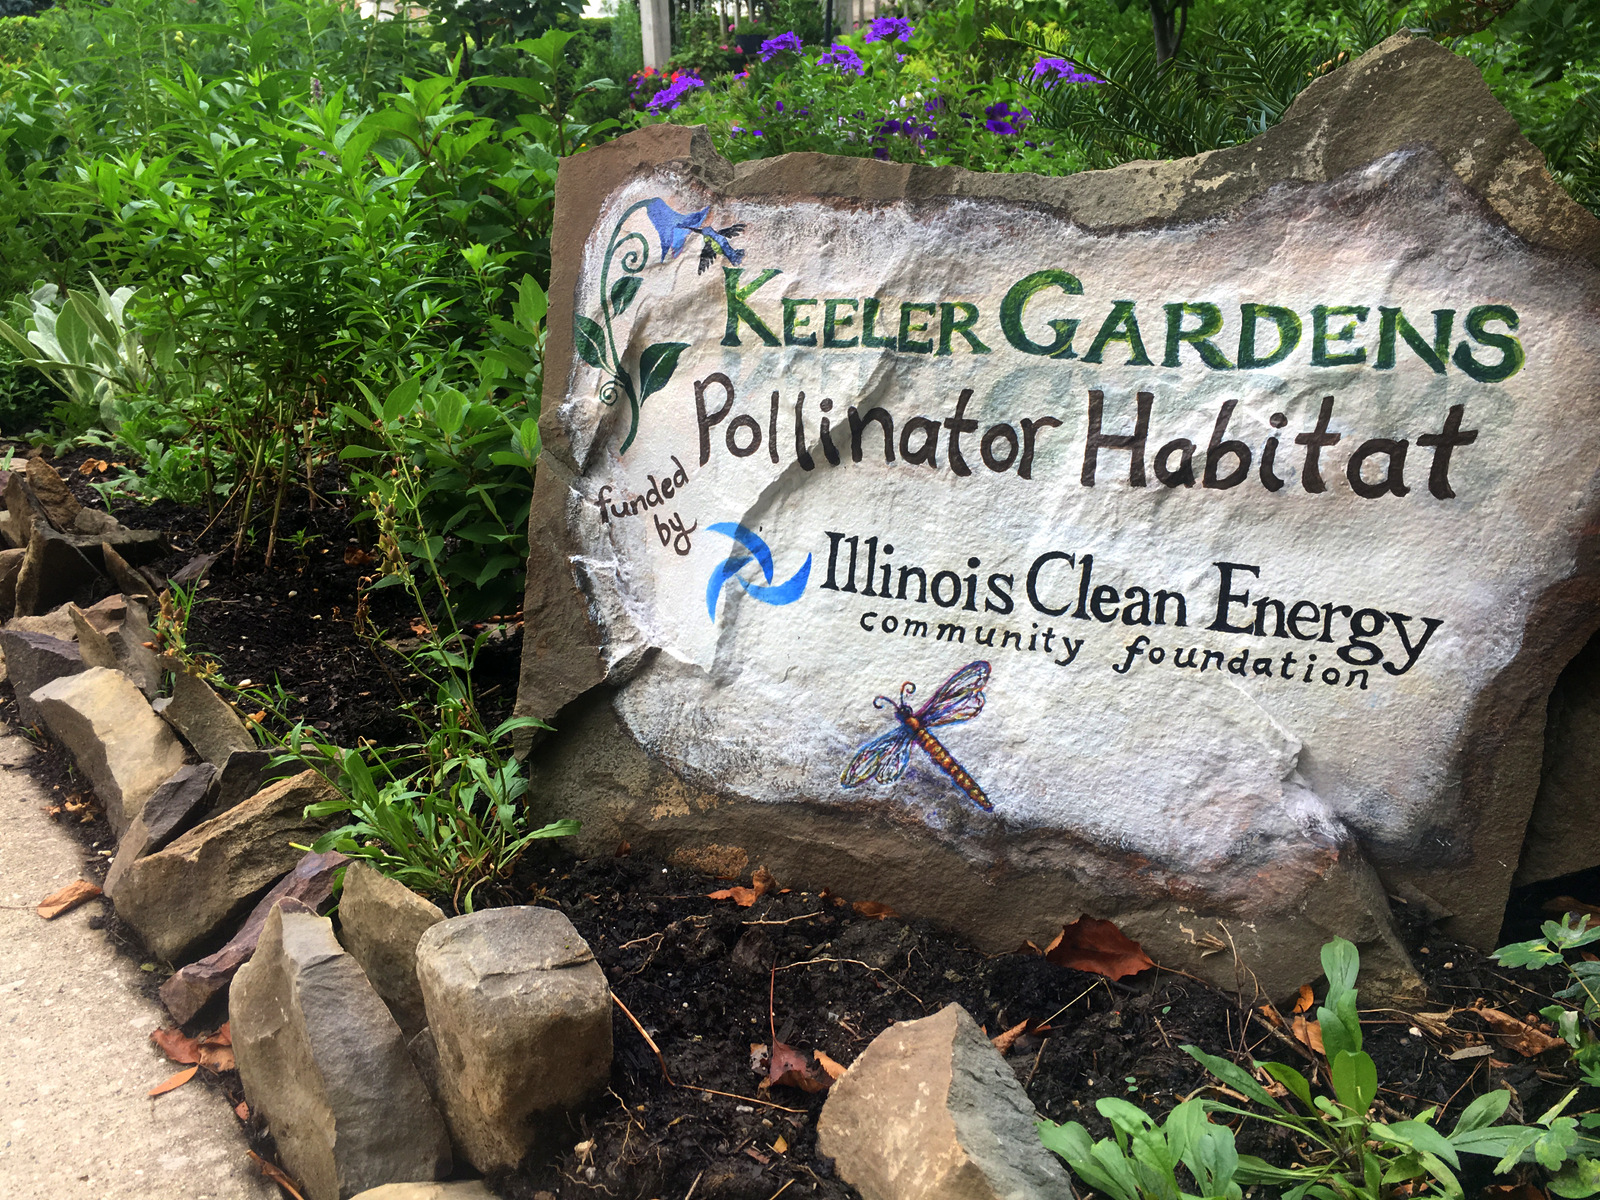 A piece of flat rock is painted with both the Keeler Gardens and Illinois Clean Energy Foundation logos at the start of the pollinator habitat. Painted by In a Jungle, with humming bird, dragon fly, and flower. In the background beautiful purple petunias and verbena appear behind the sign.